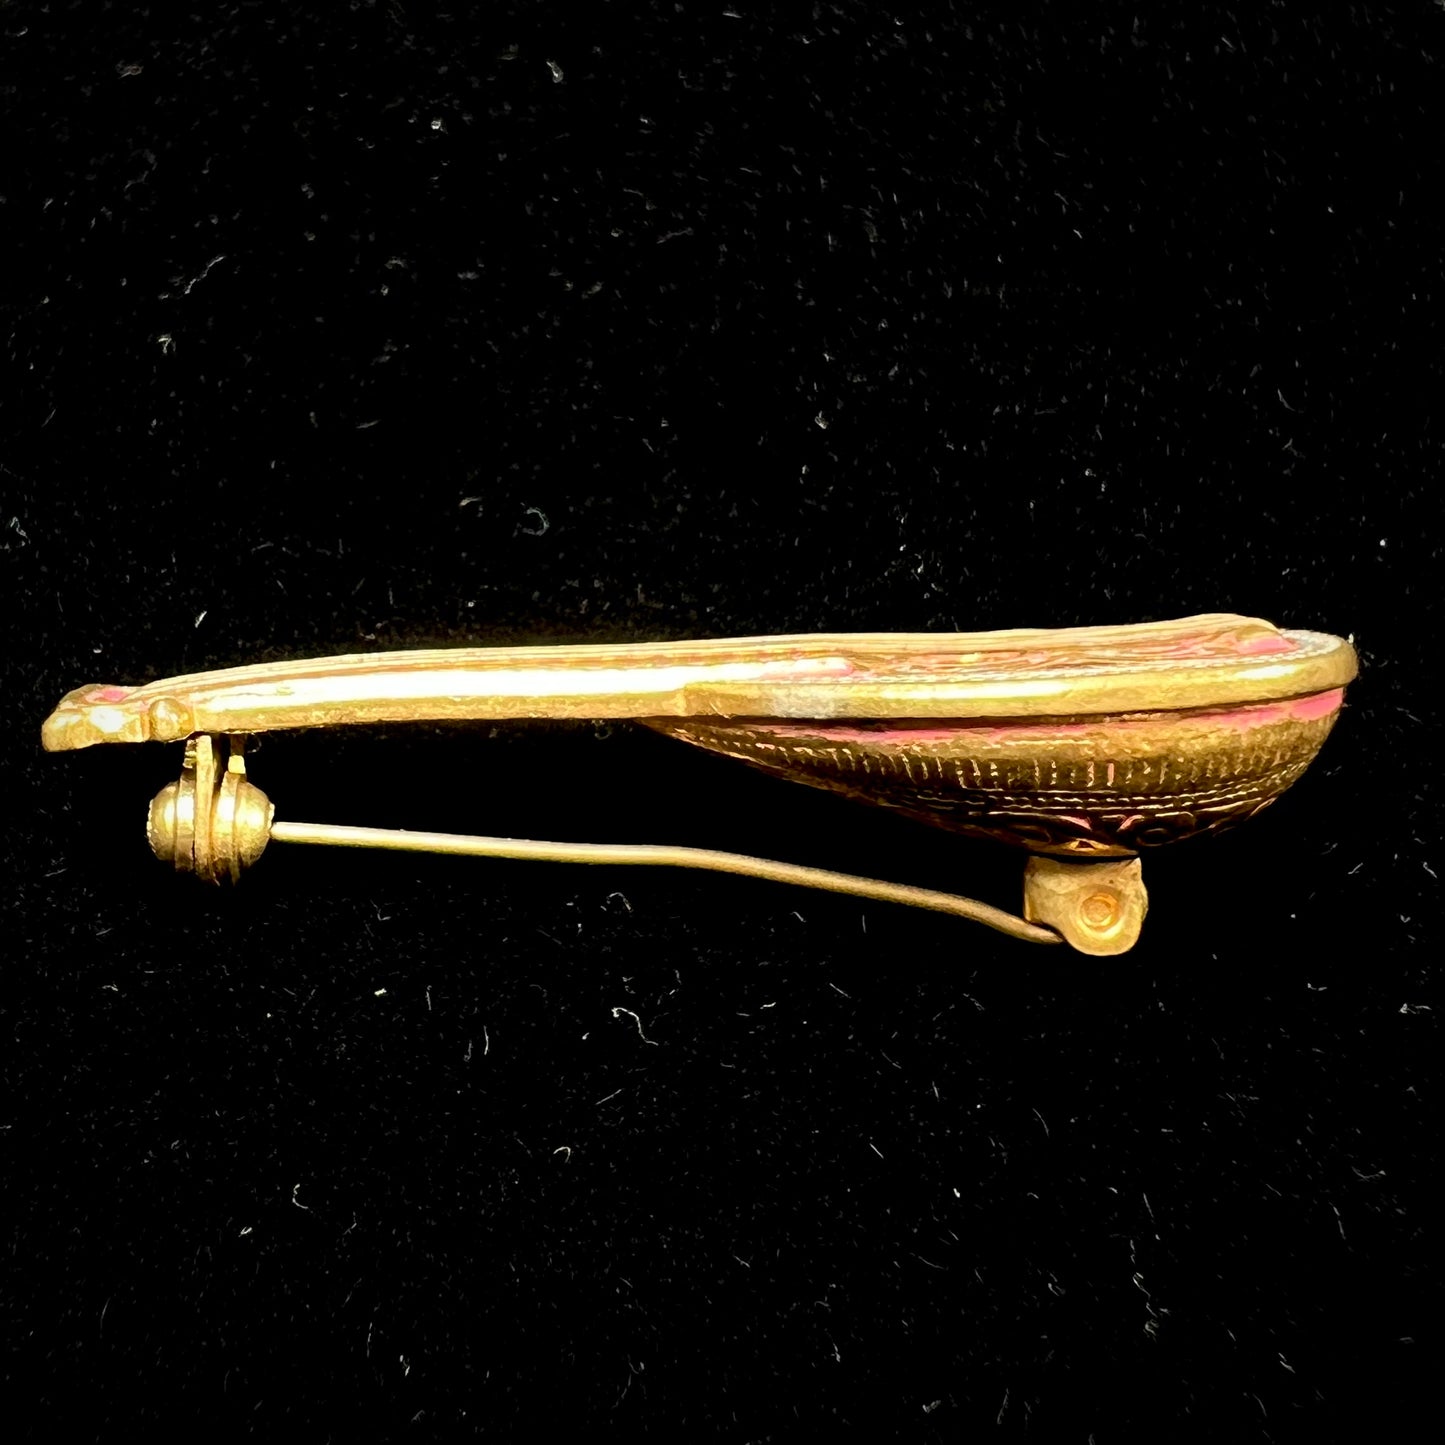 A gold filled mandolin brooch.  The back of the pin is stamped "SPAIN."